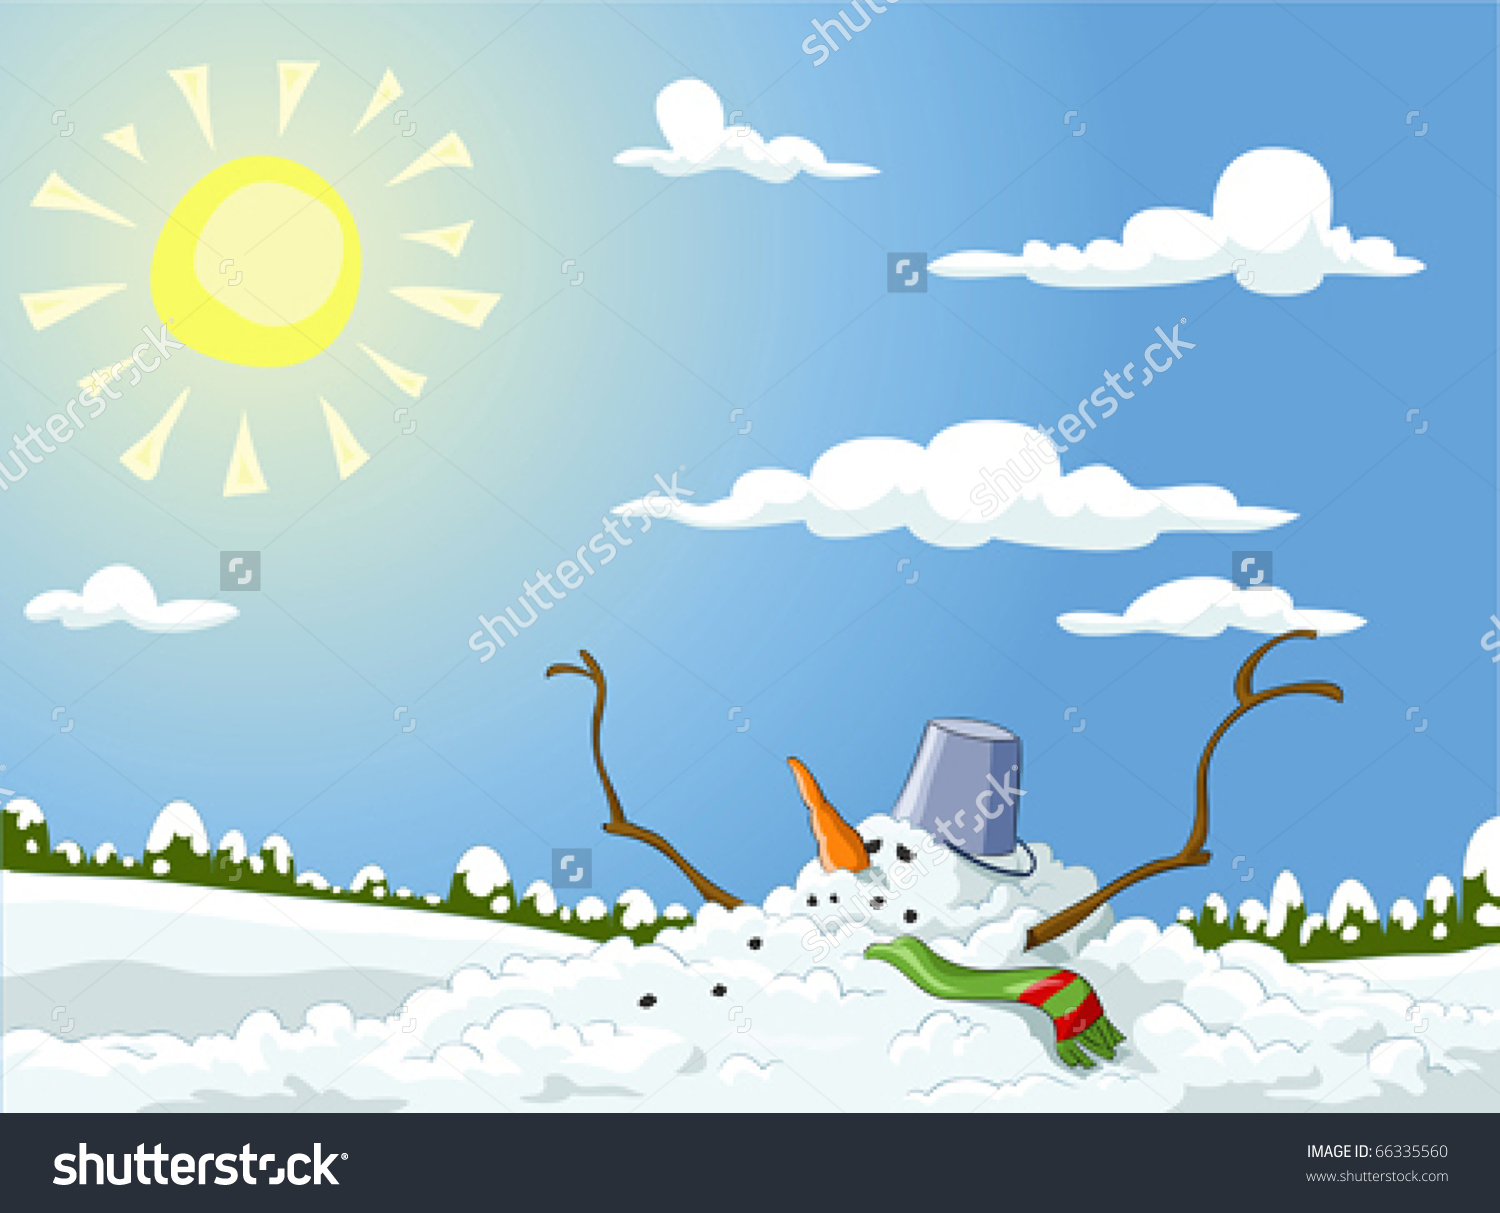 Of . Winter clipart end